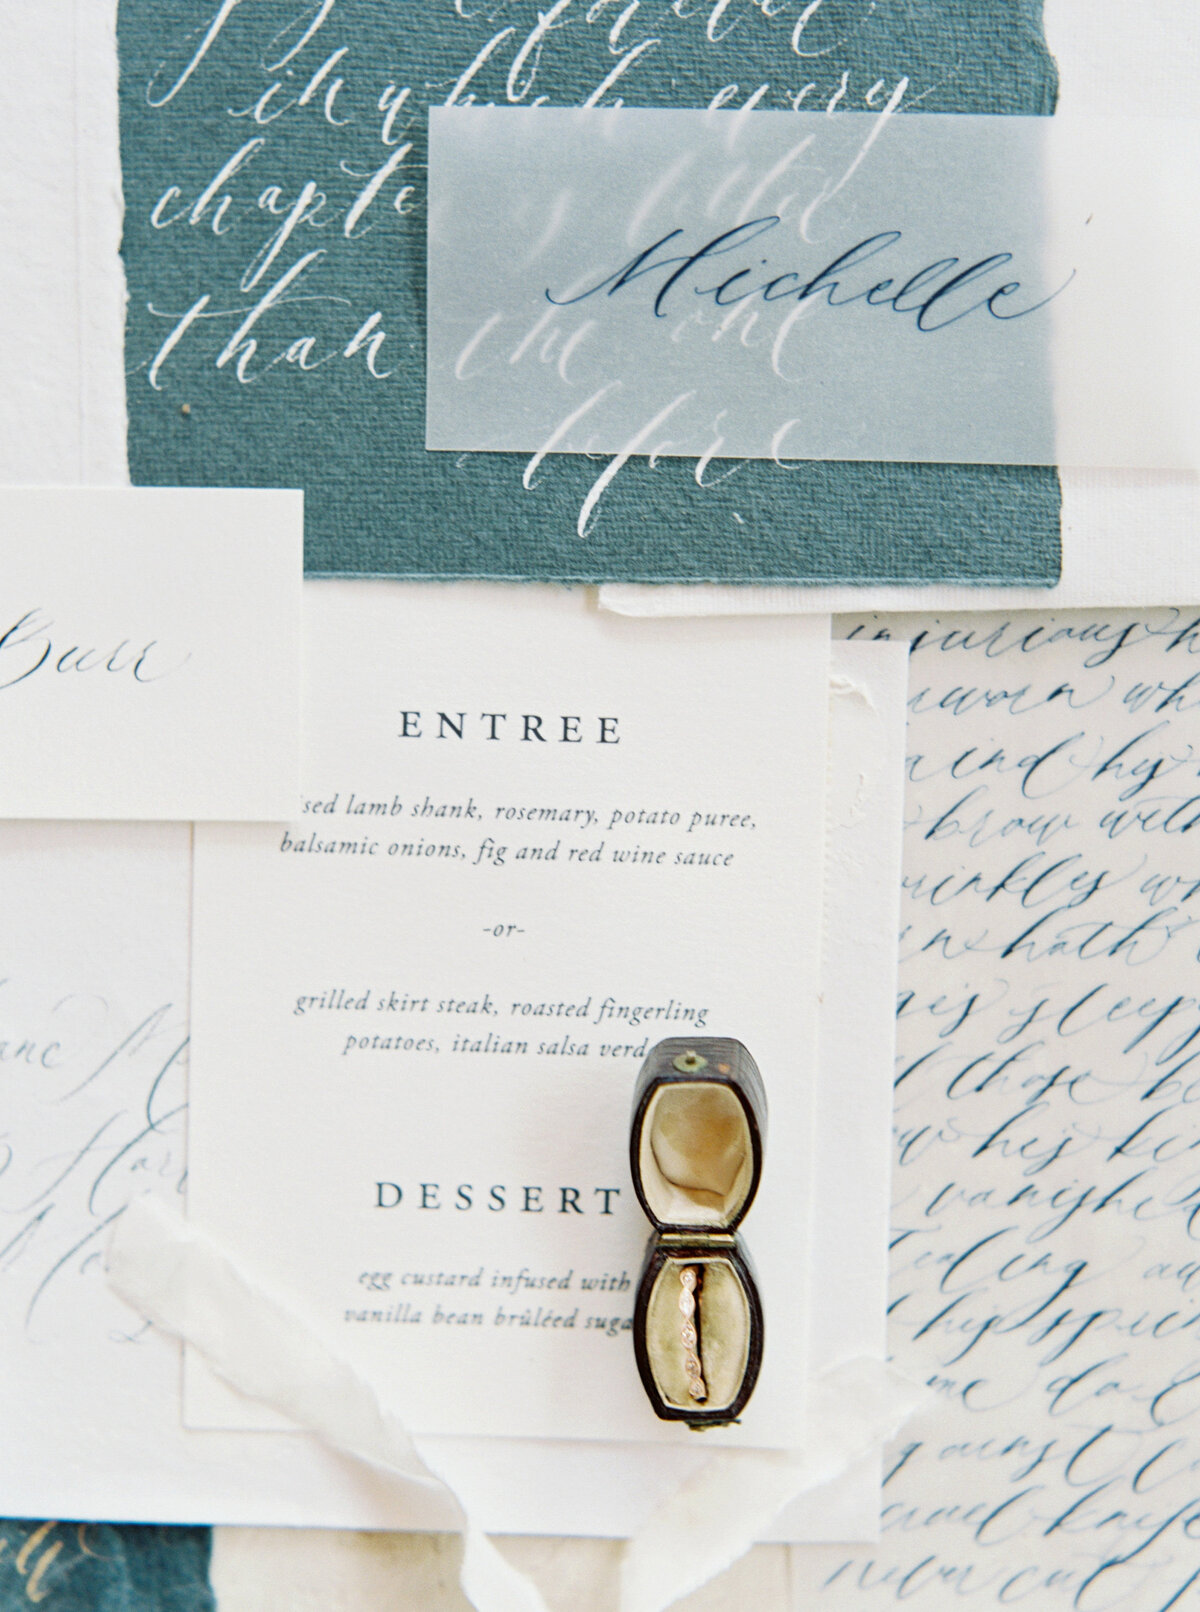 Allora & Ivy Event Co |  Dallas Wedding Planners & Event Designers | Navy & Gold Editorial Inspiration at The White Sparrow